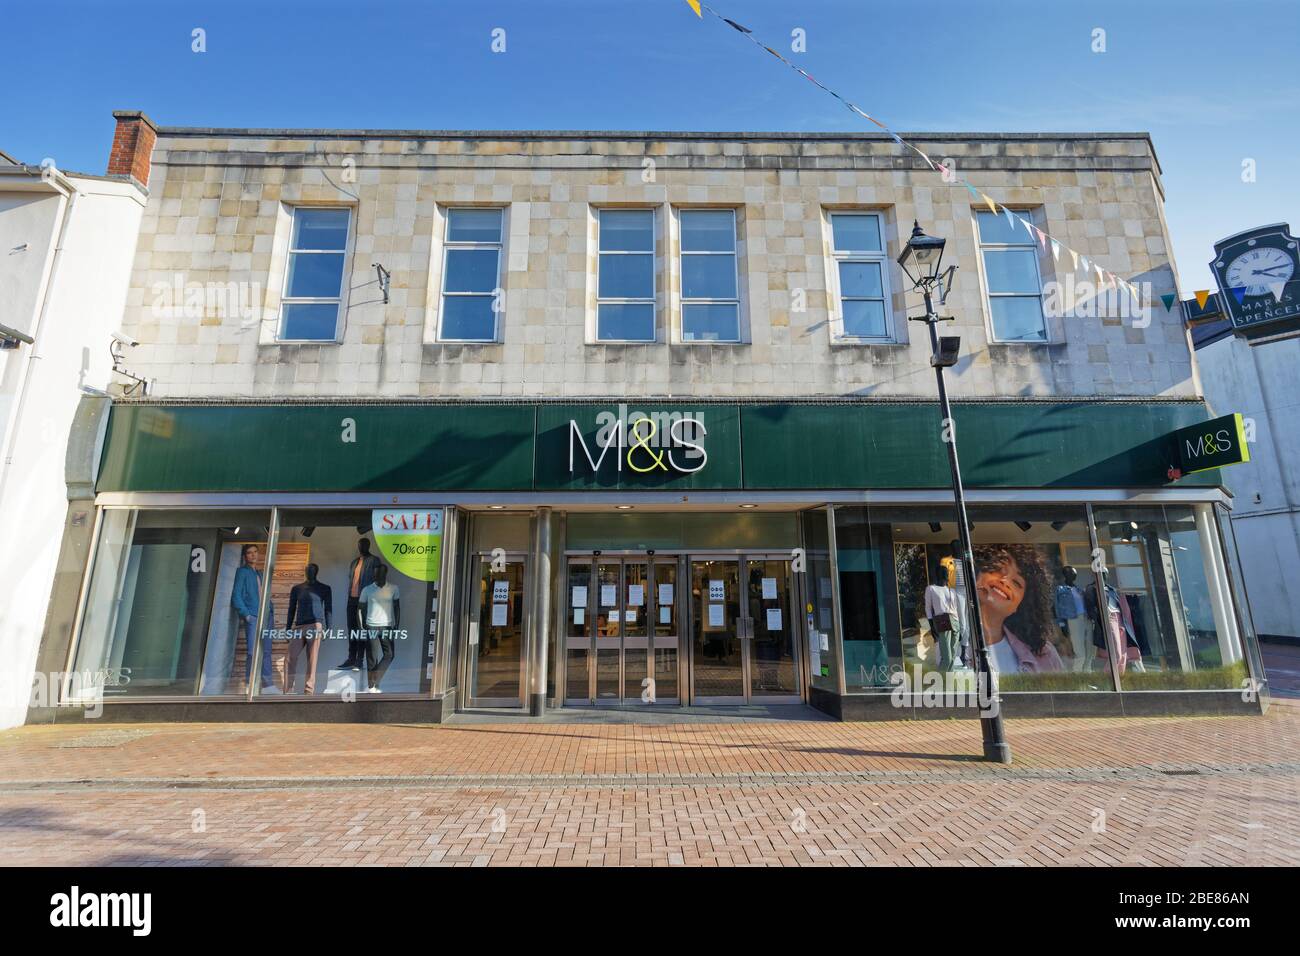 Pictured: The Marks and Spencer store in Neath, Wales, UK. Friday 27 March 2020 Re: Covid-19 Coronavirus pandemic, UK. Stock Photo